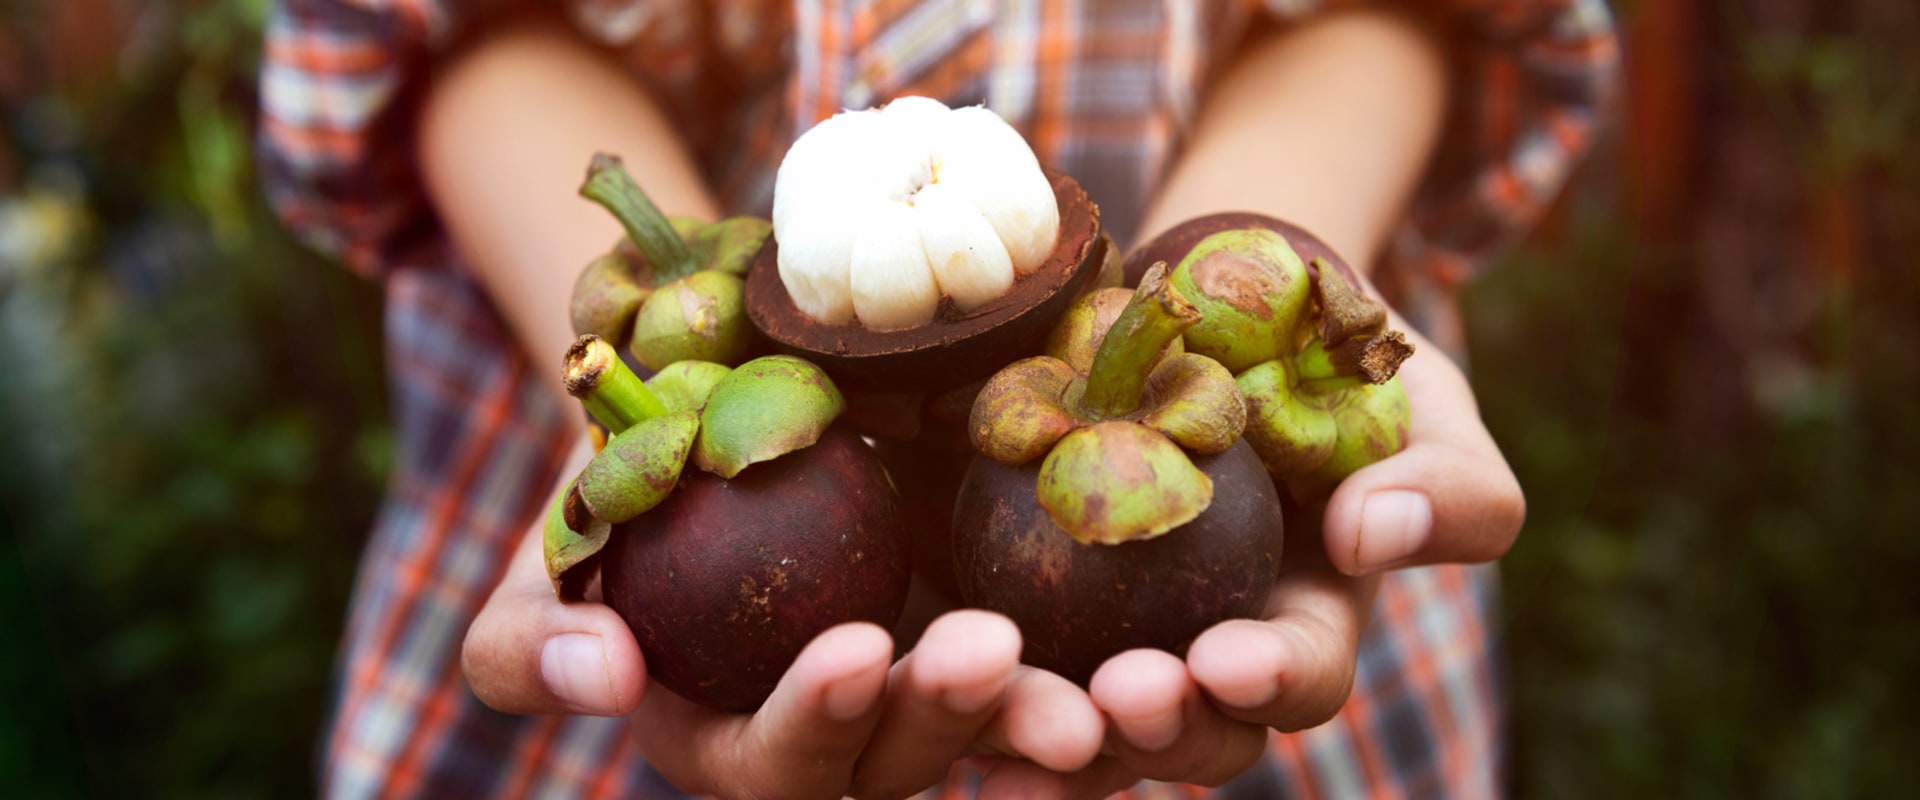 Why is mangosteen not allowed in the us?